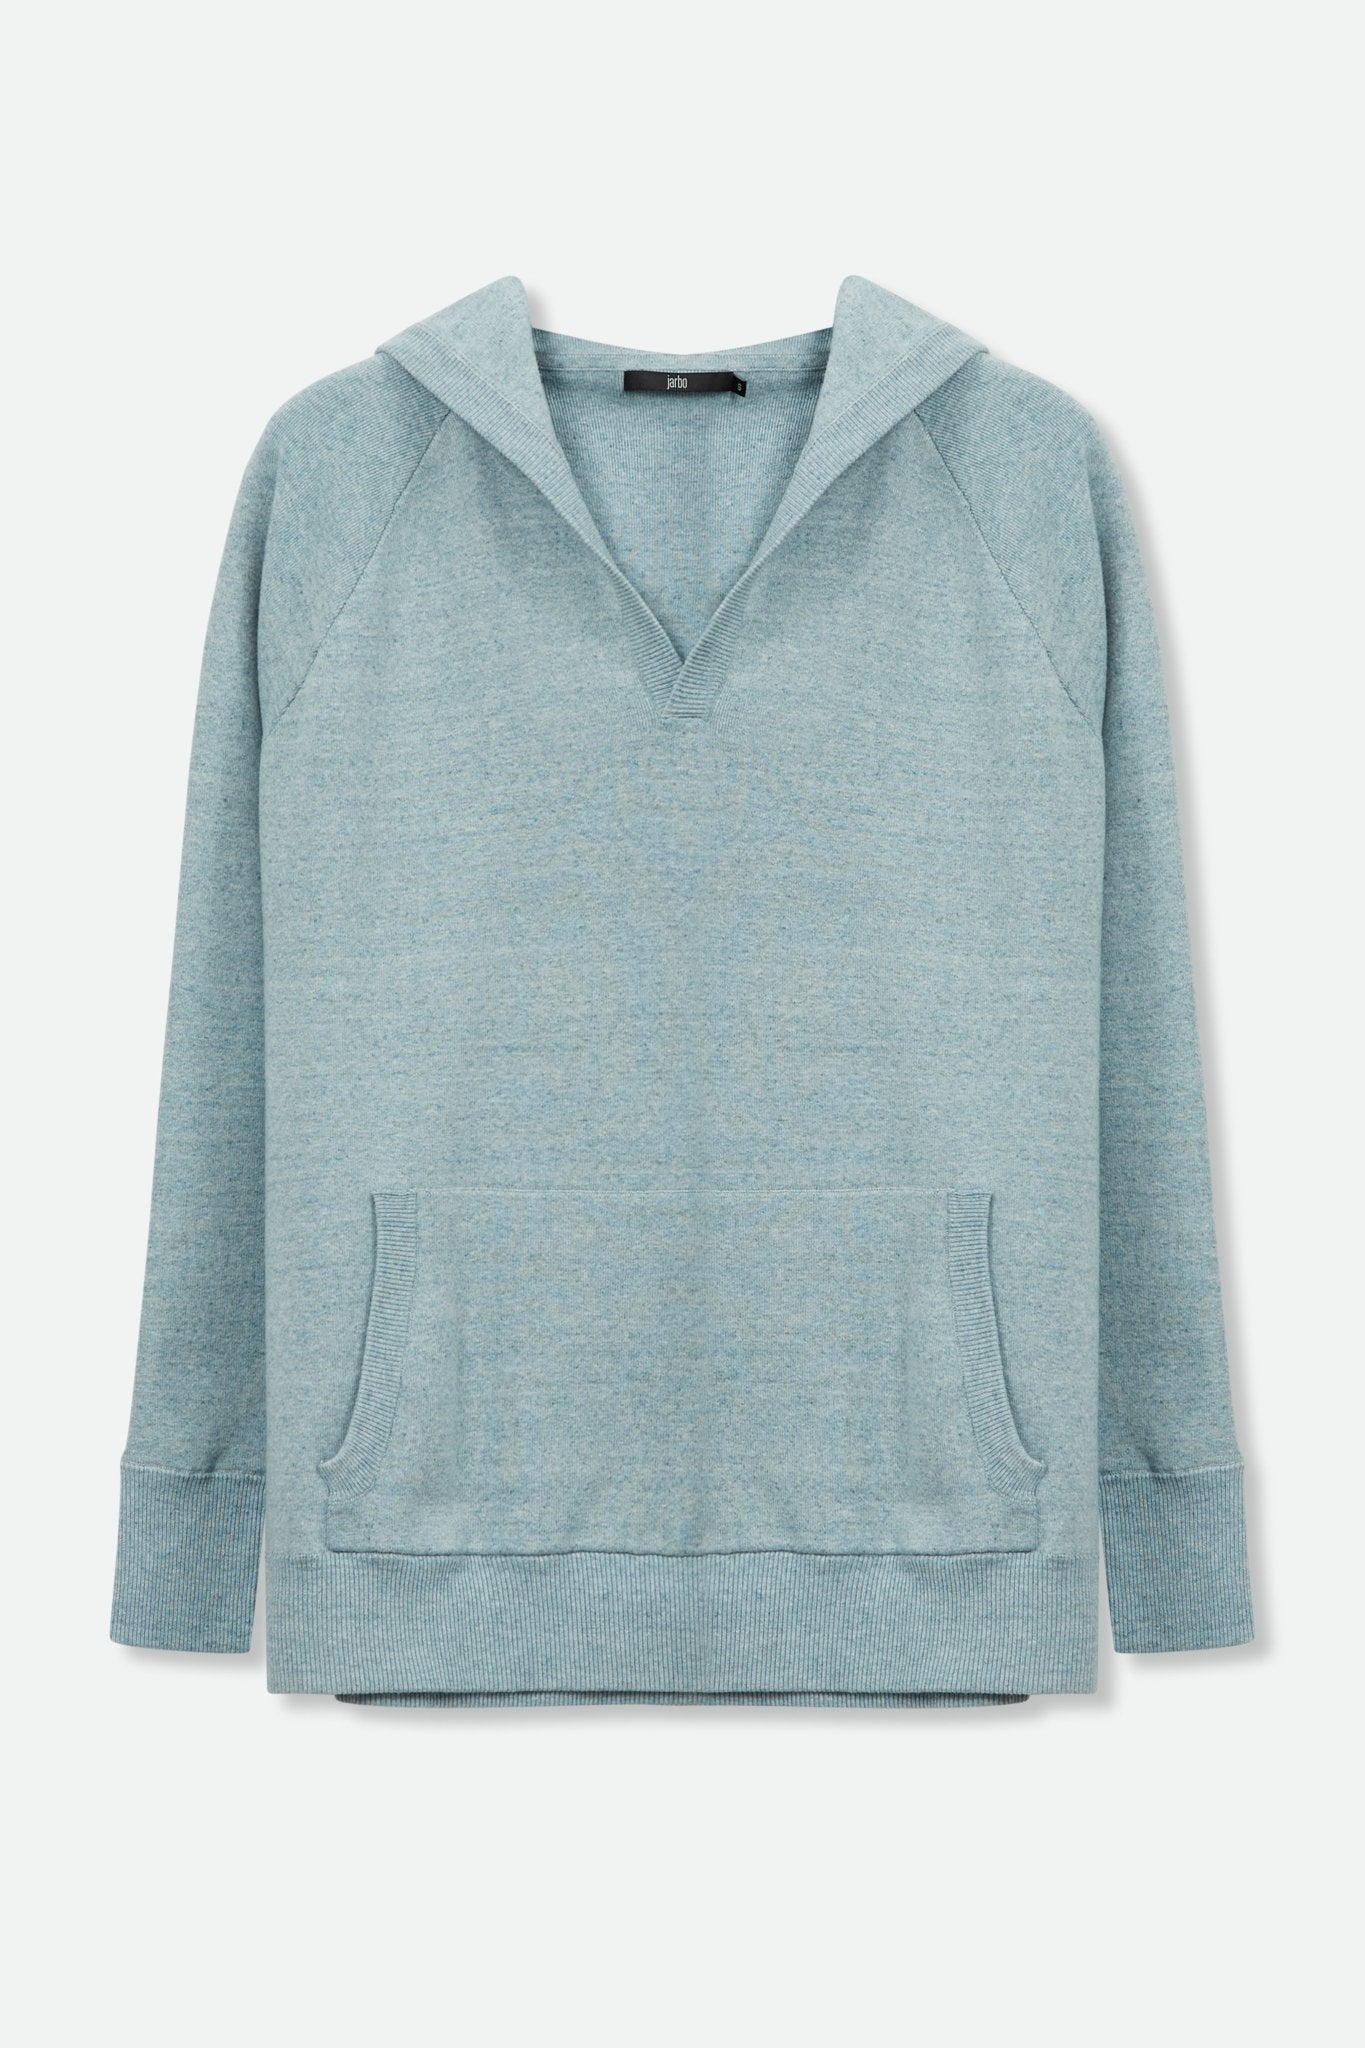 PADMA PULLOVER HOODIE IN DOUBLE KNIT HEATHER PIMA COTTON WITH STRETCH